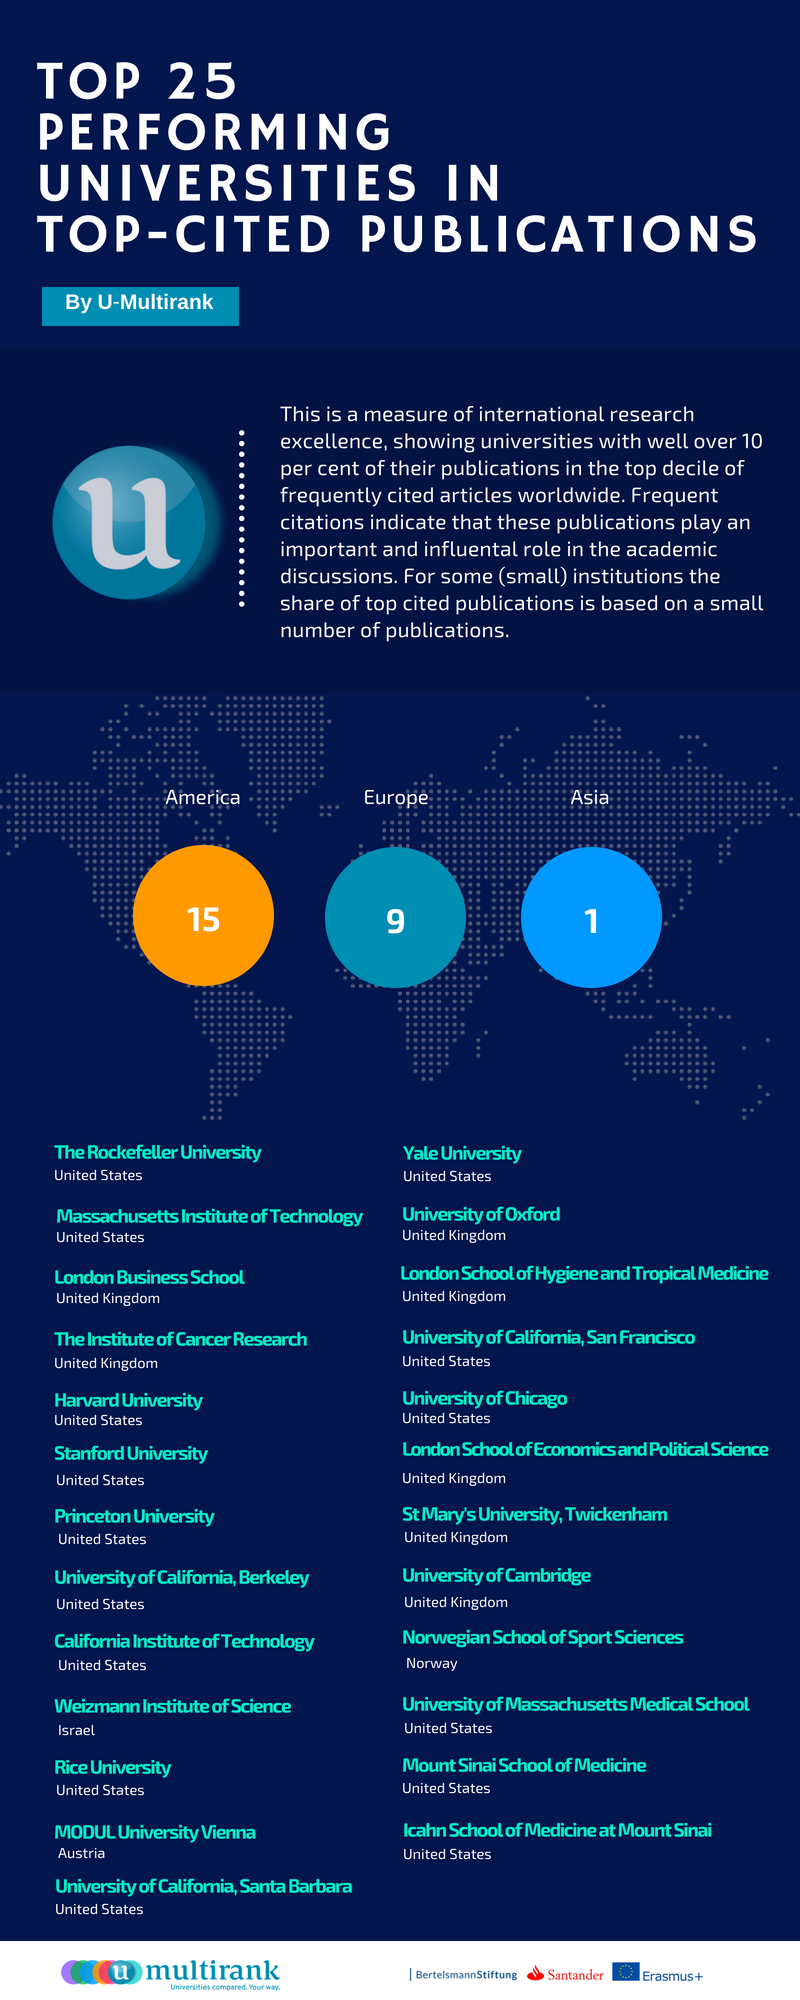 Top 25 Performing Universities in Top-Cited Publications